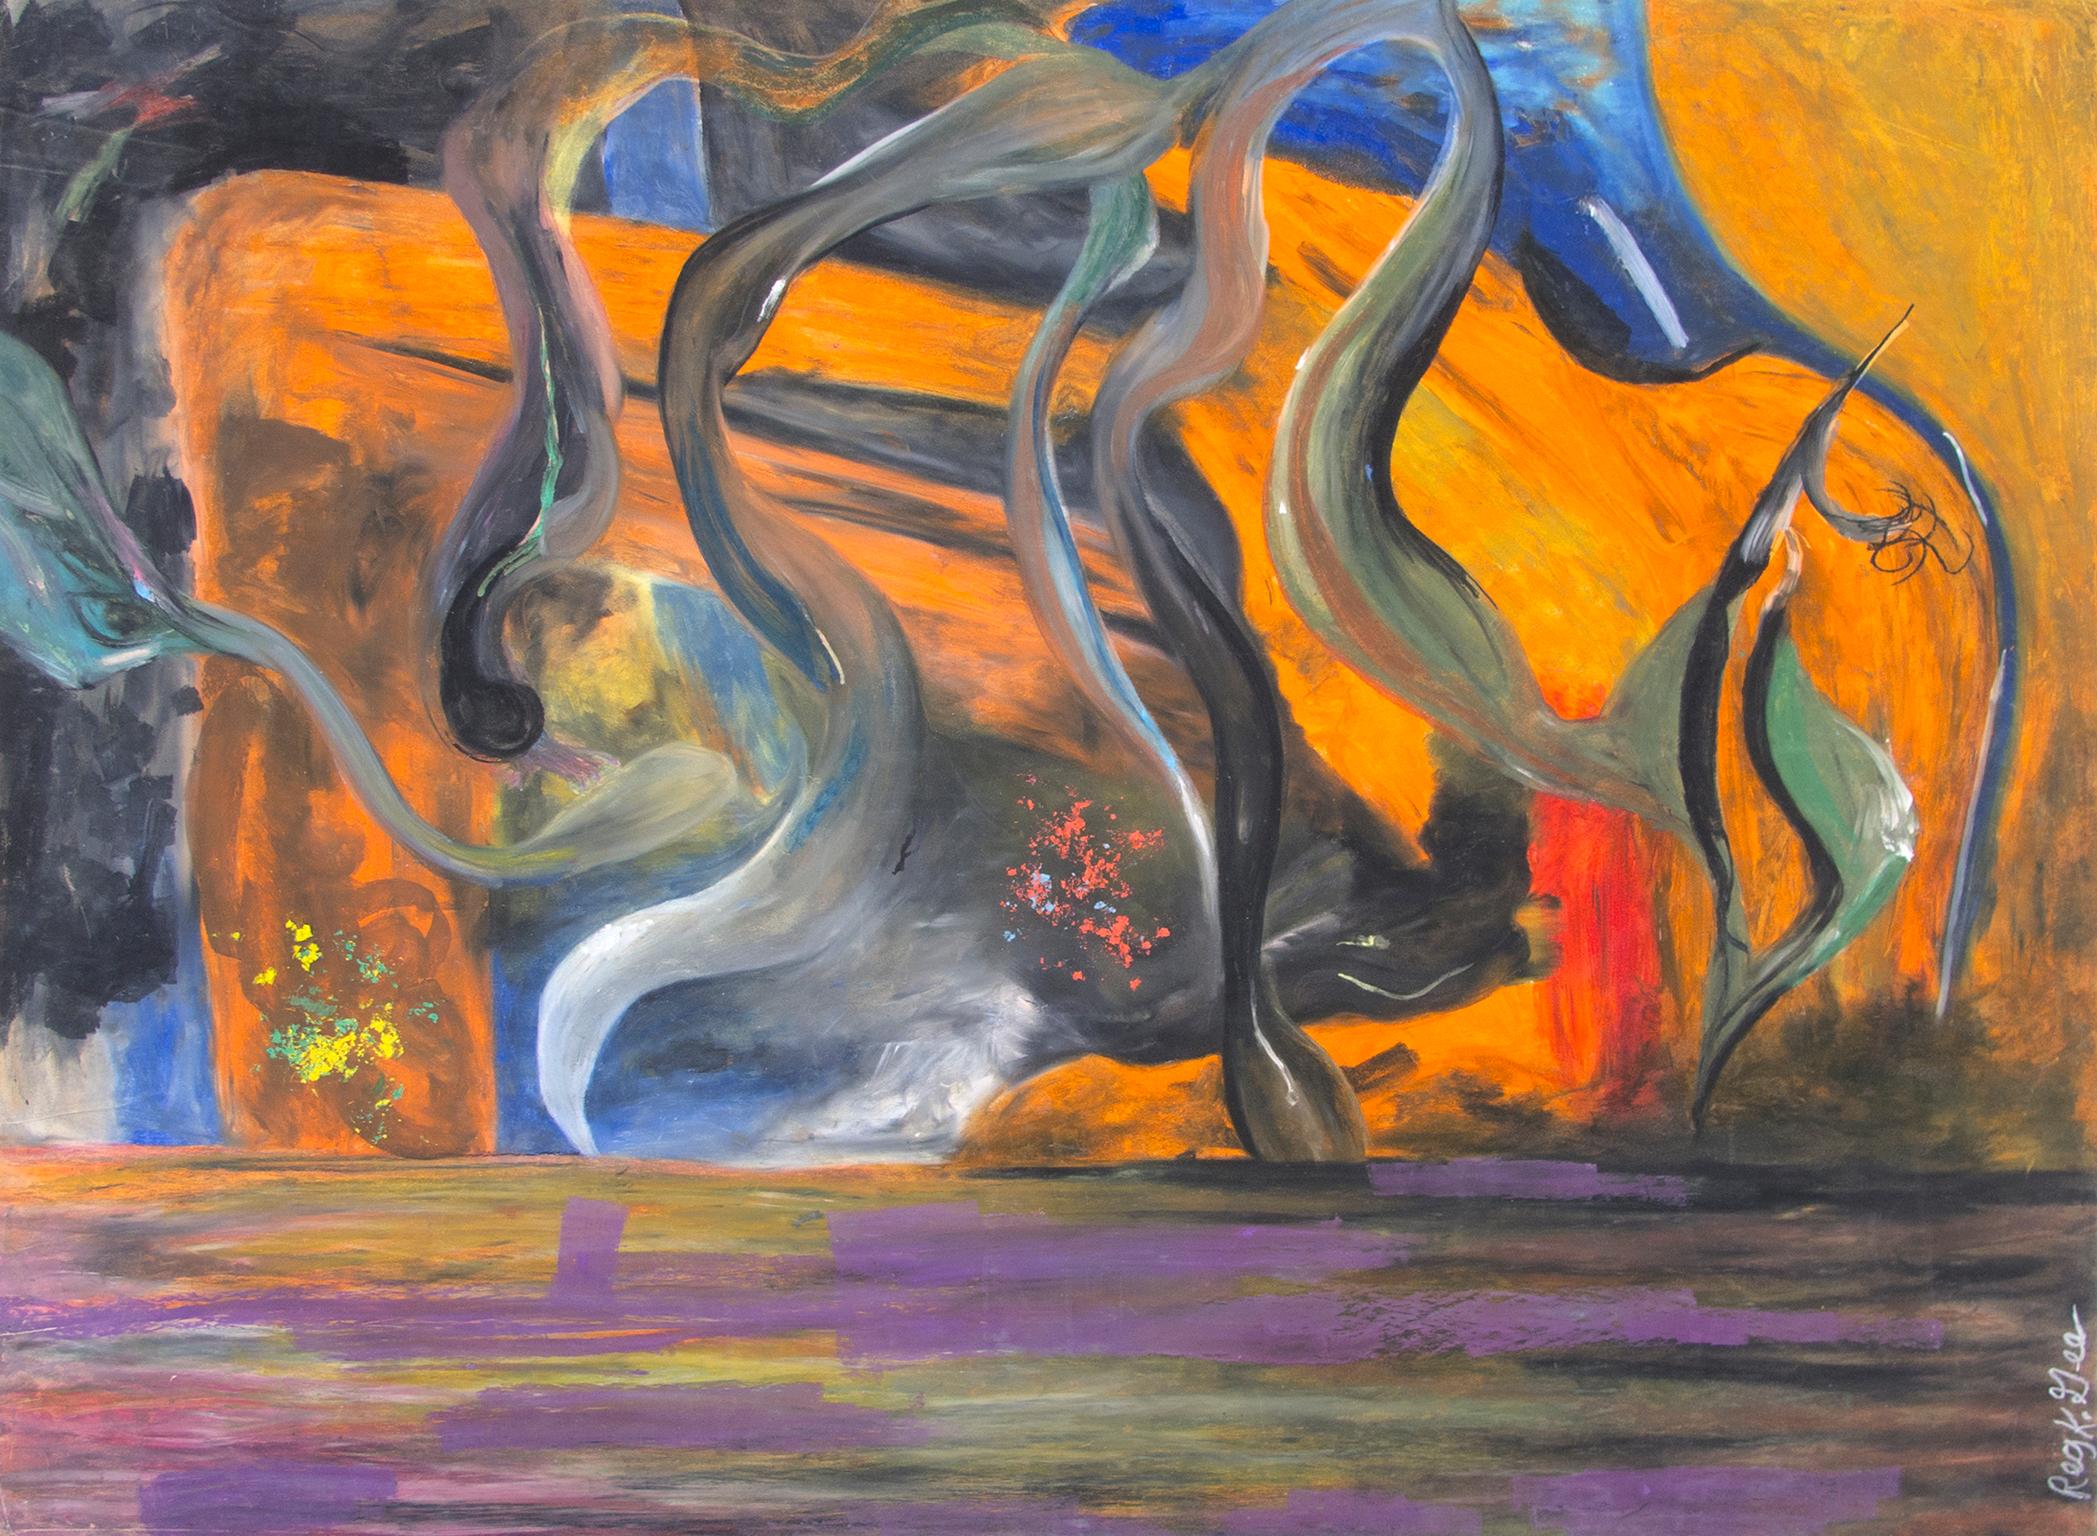 "Not Intended For Office Viewing Series, Section F" is an original oil pastel drawing on illustration board by Reginald K. Gee. The artist signed the piece lower right. This piece features an abstract landscape in orange, blue, and purple. 

30" x